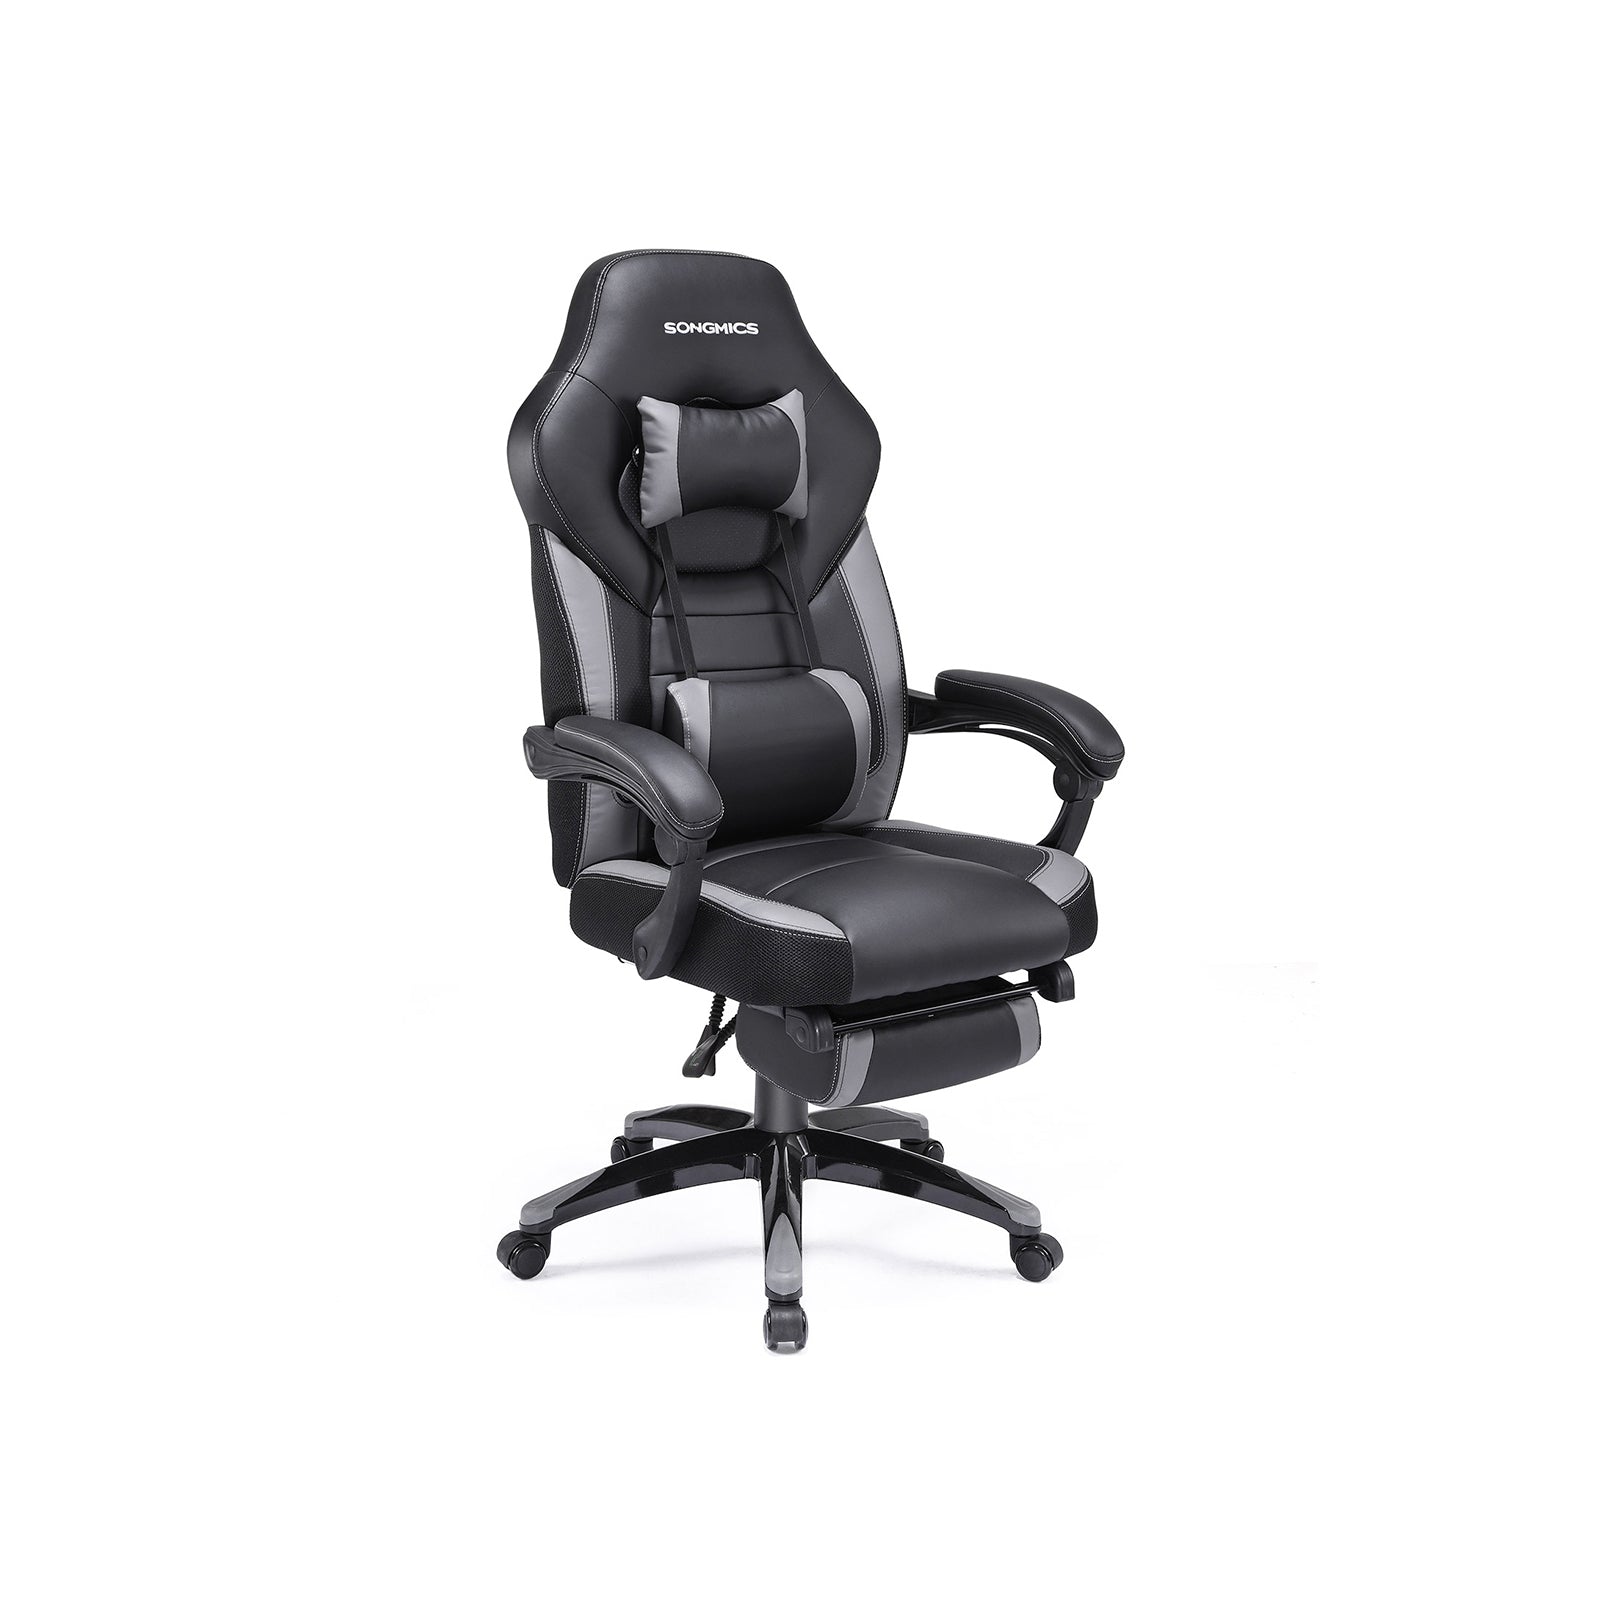 Image of Gaming Chair, Office Racing Chair with Footrest, Ergonomic Design, Adjustable Headrest, Lumbar Support, 150 kg Weight Capacity, Black and Grey